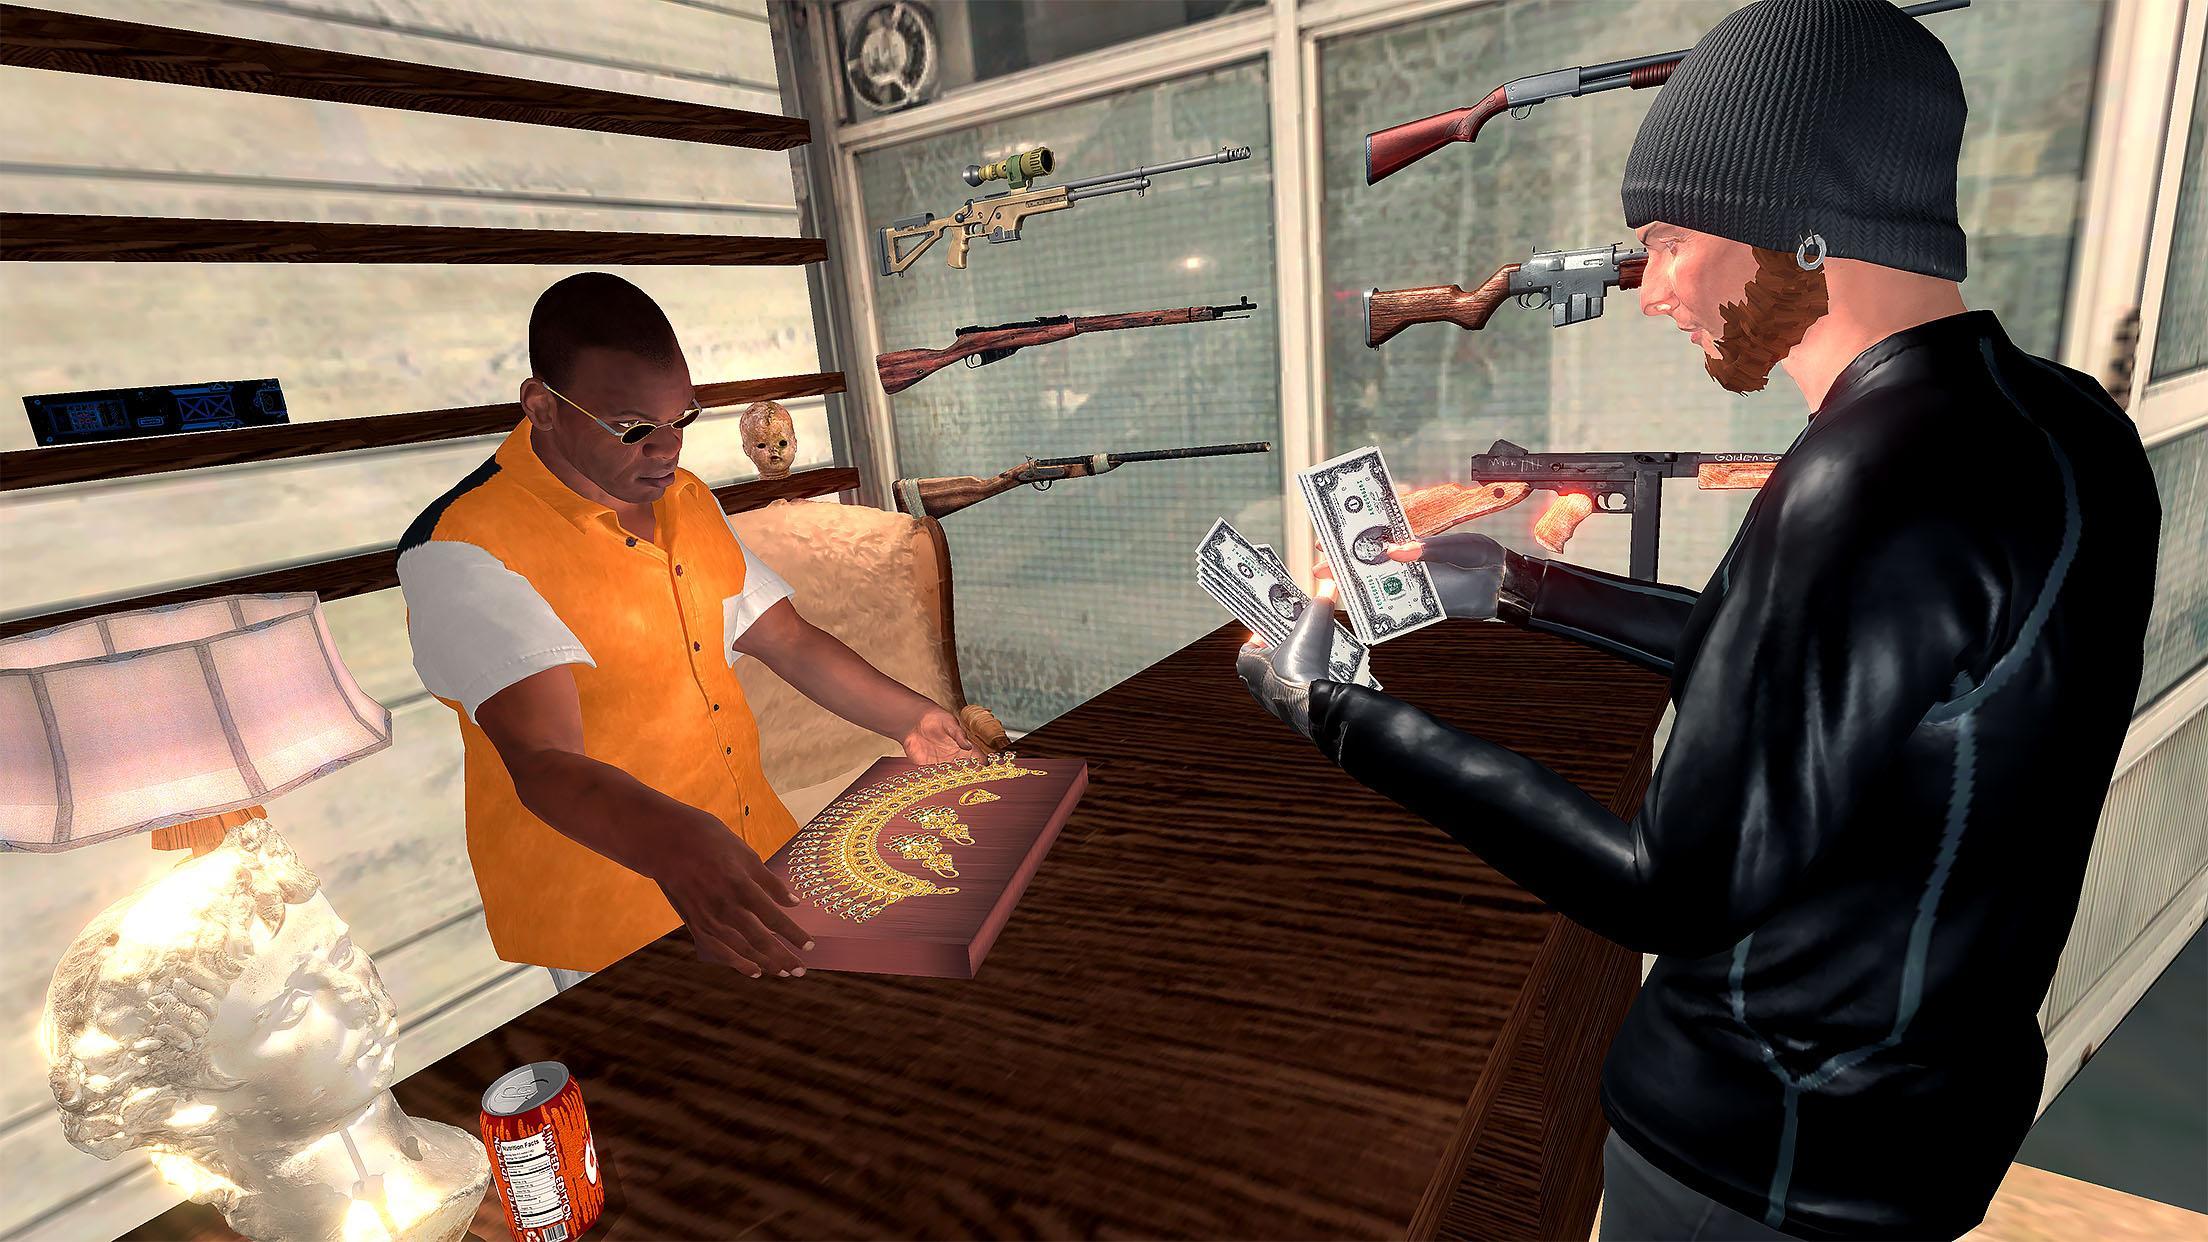 Heist Thief Robbery Sneak Simulator For Android Apk Download - roblox thief life simulator bank 2020